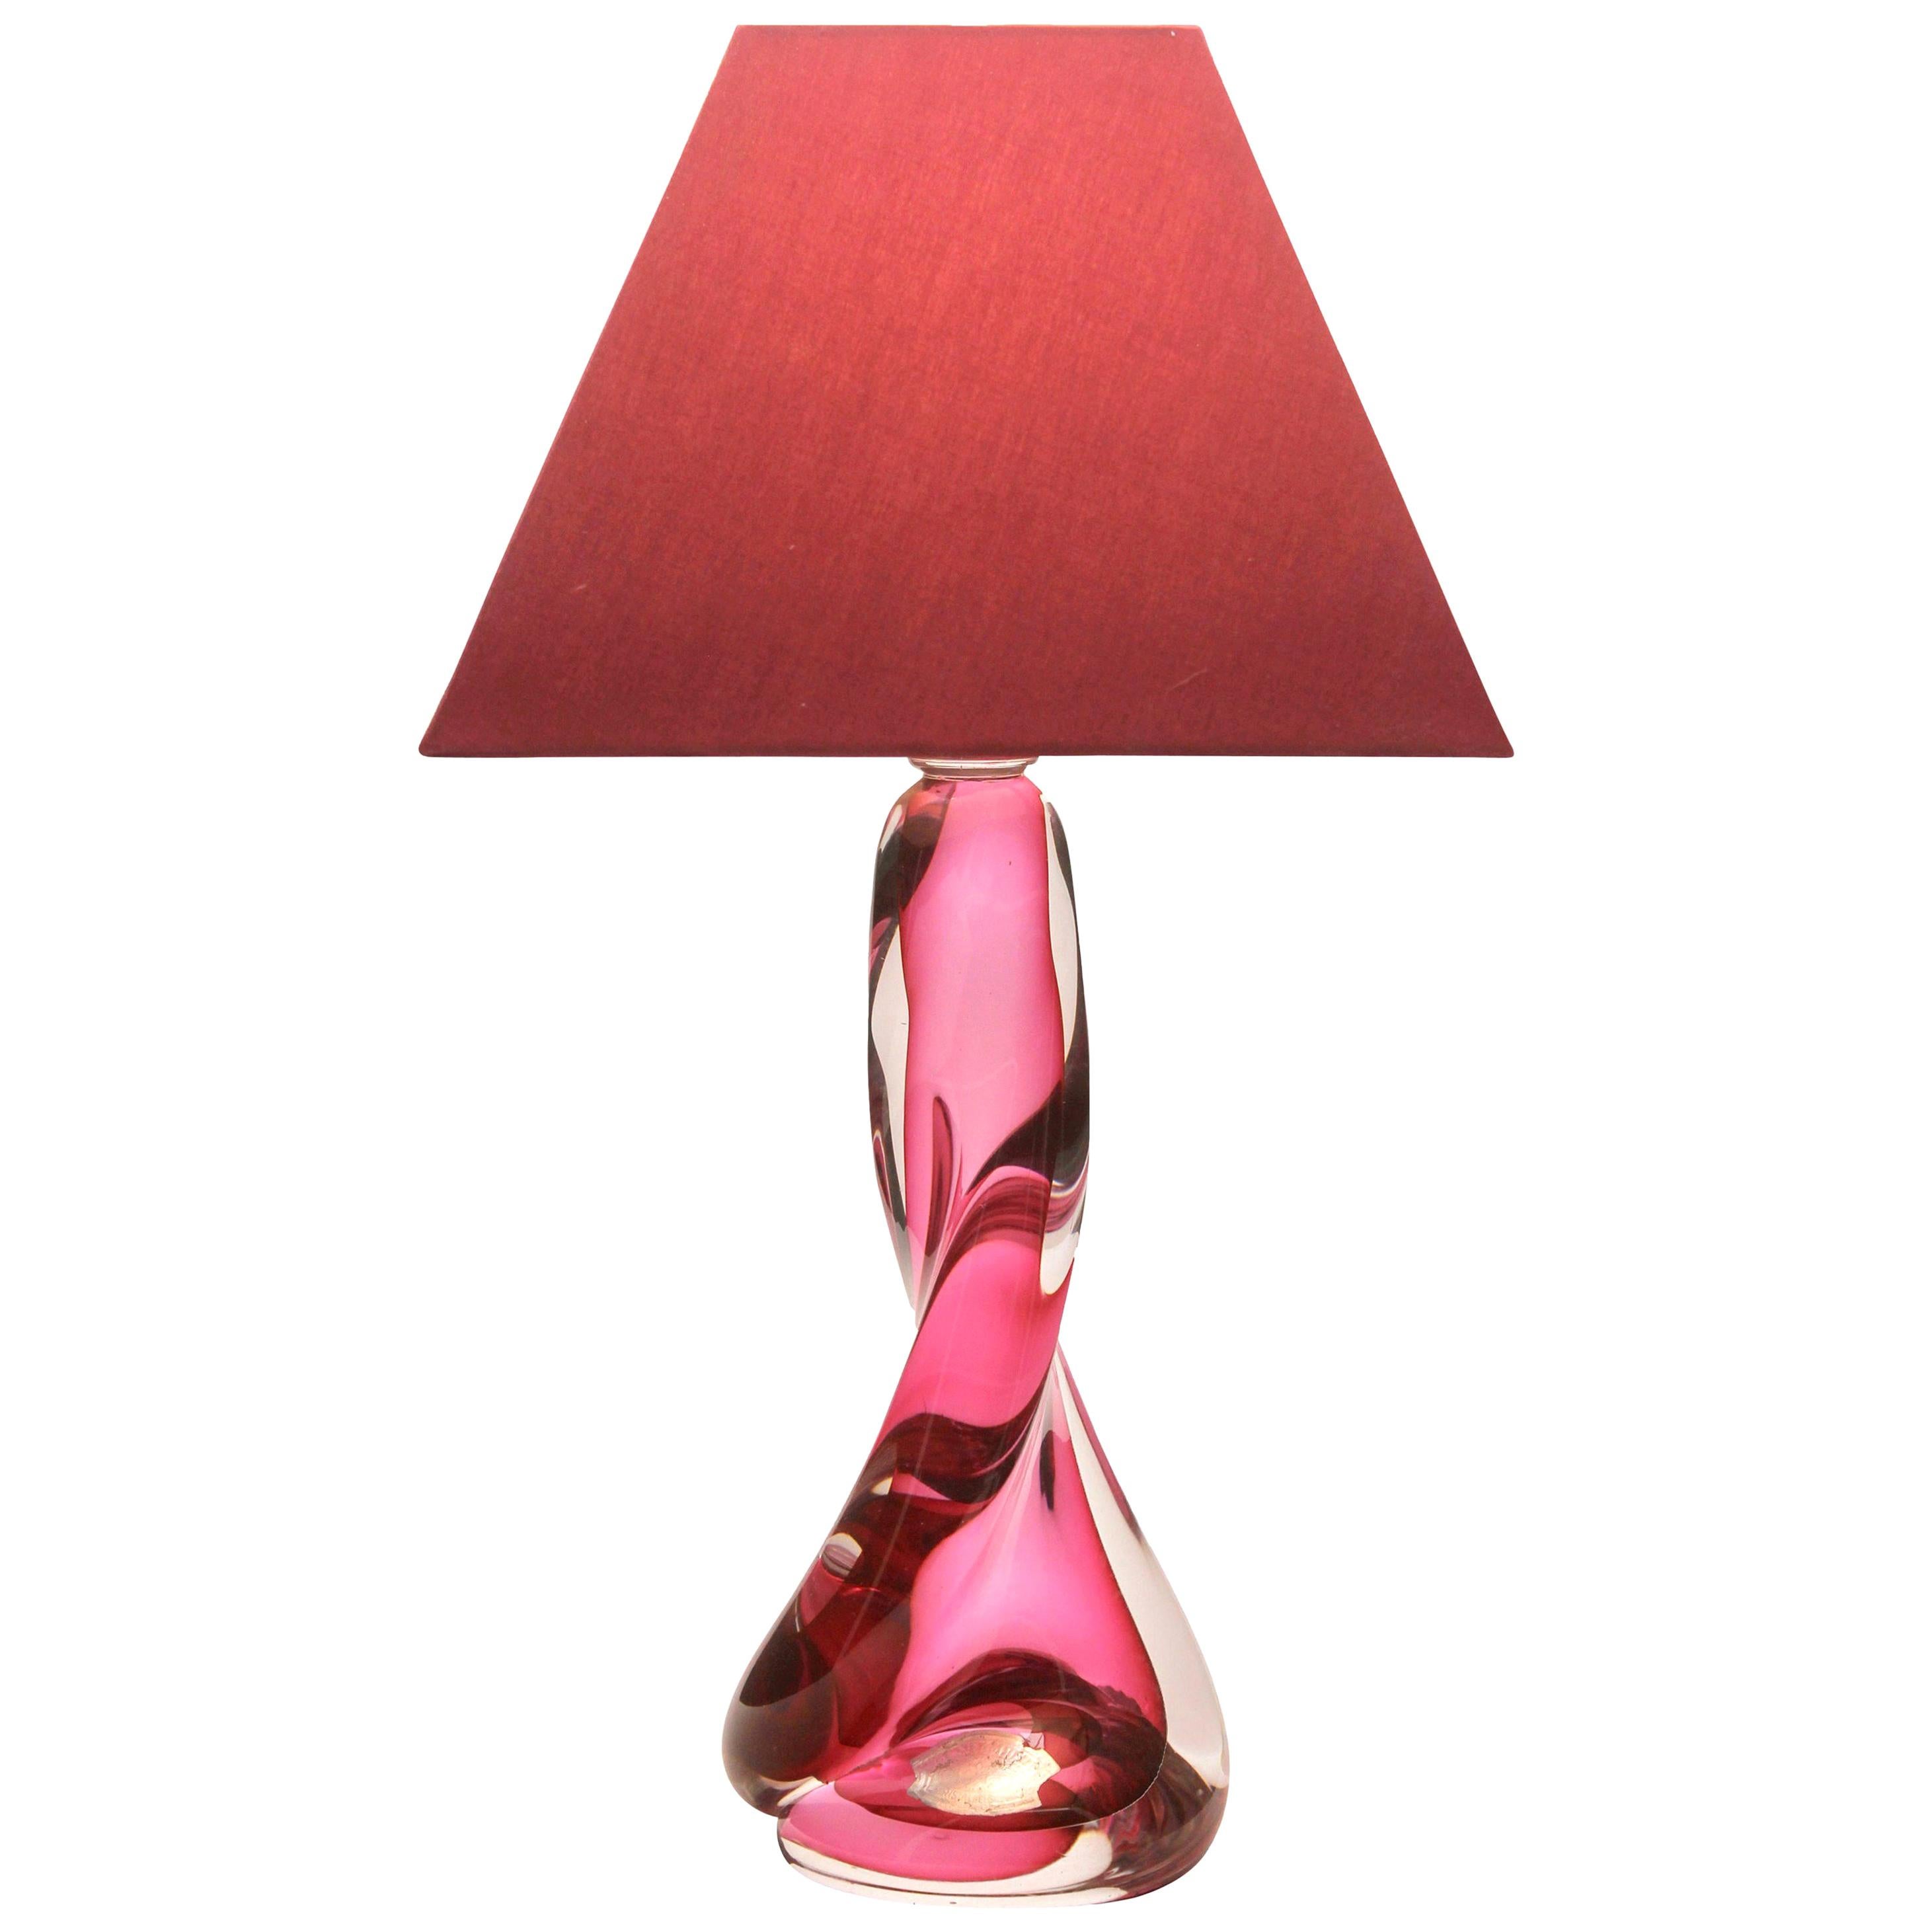 Val Saint Lambert Crystal Table Lamp, Excellent Condition with Factory Label